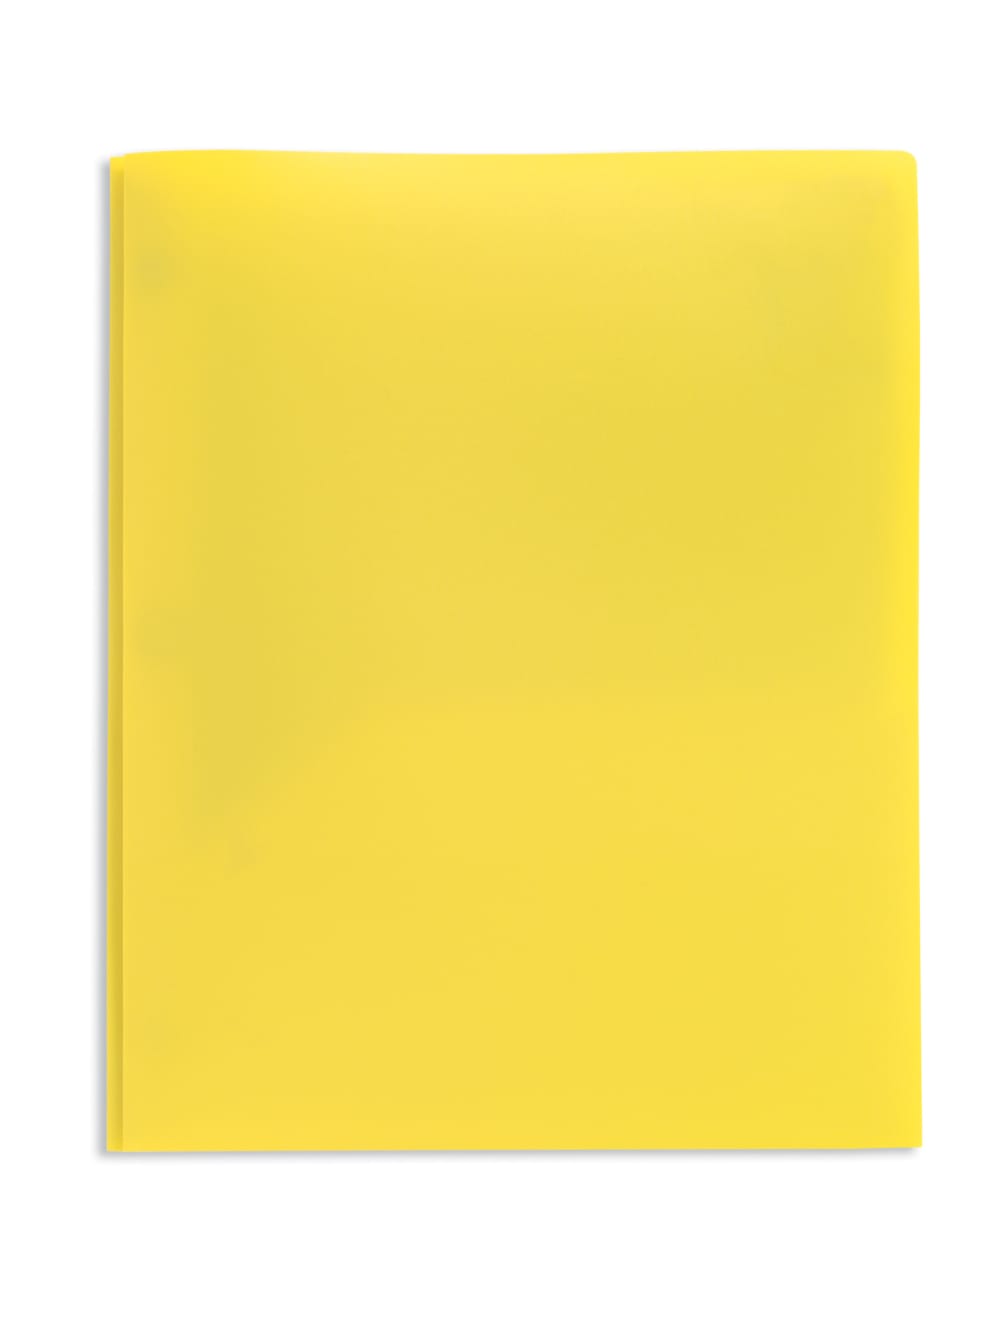 Office Depot® Brand 2-Pocket Poly Folder with Prongs, Letter Size, Yellow
				
		        		












	
			
				
				 
					Item # 
					
						
							
							
								756989